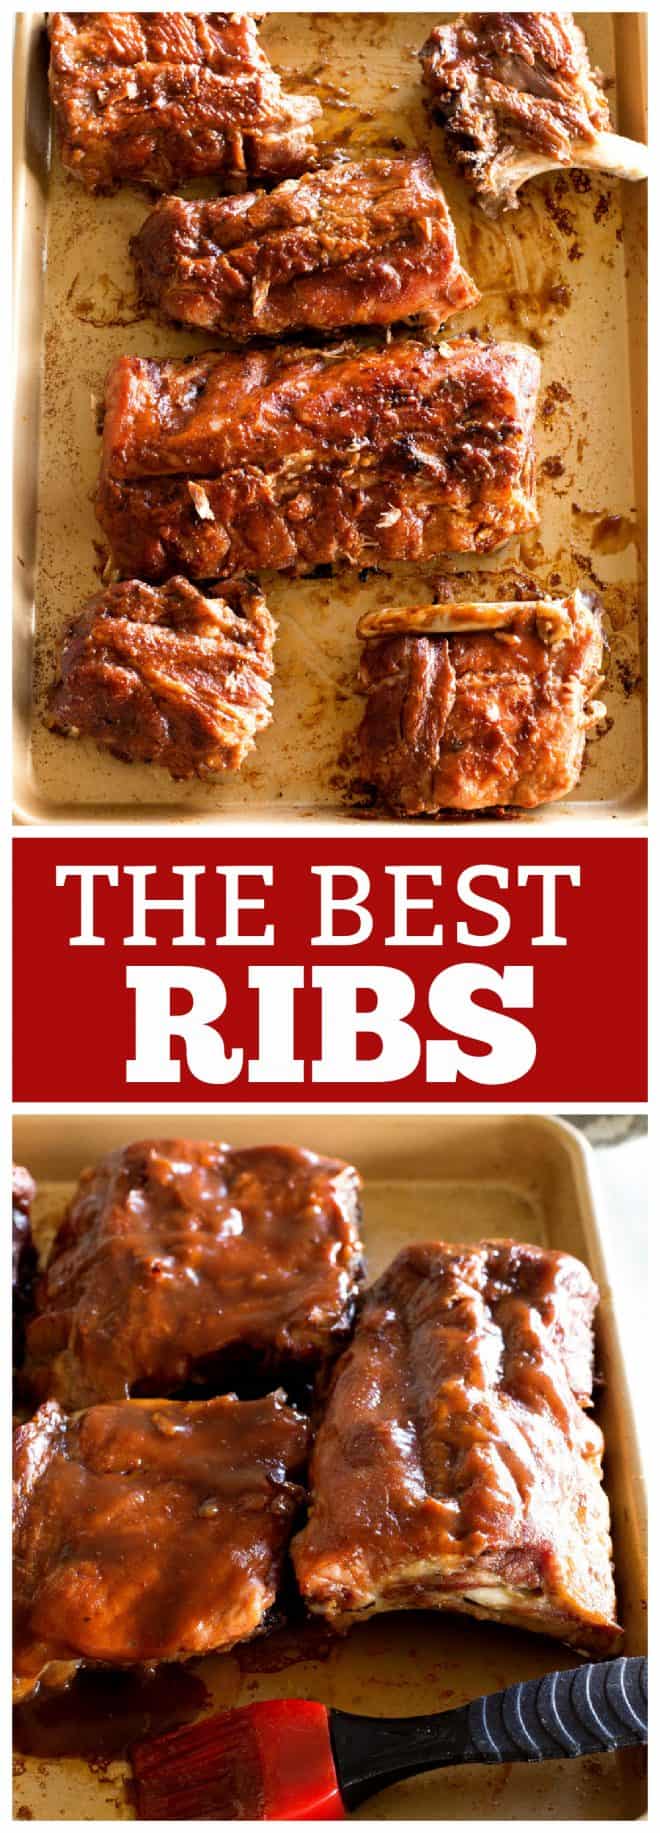 Slow cooker ribs